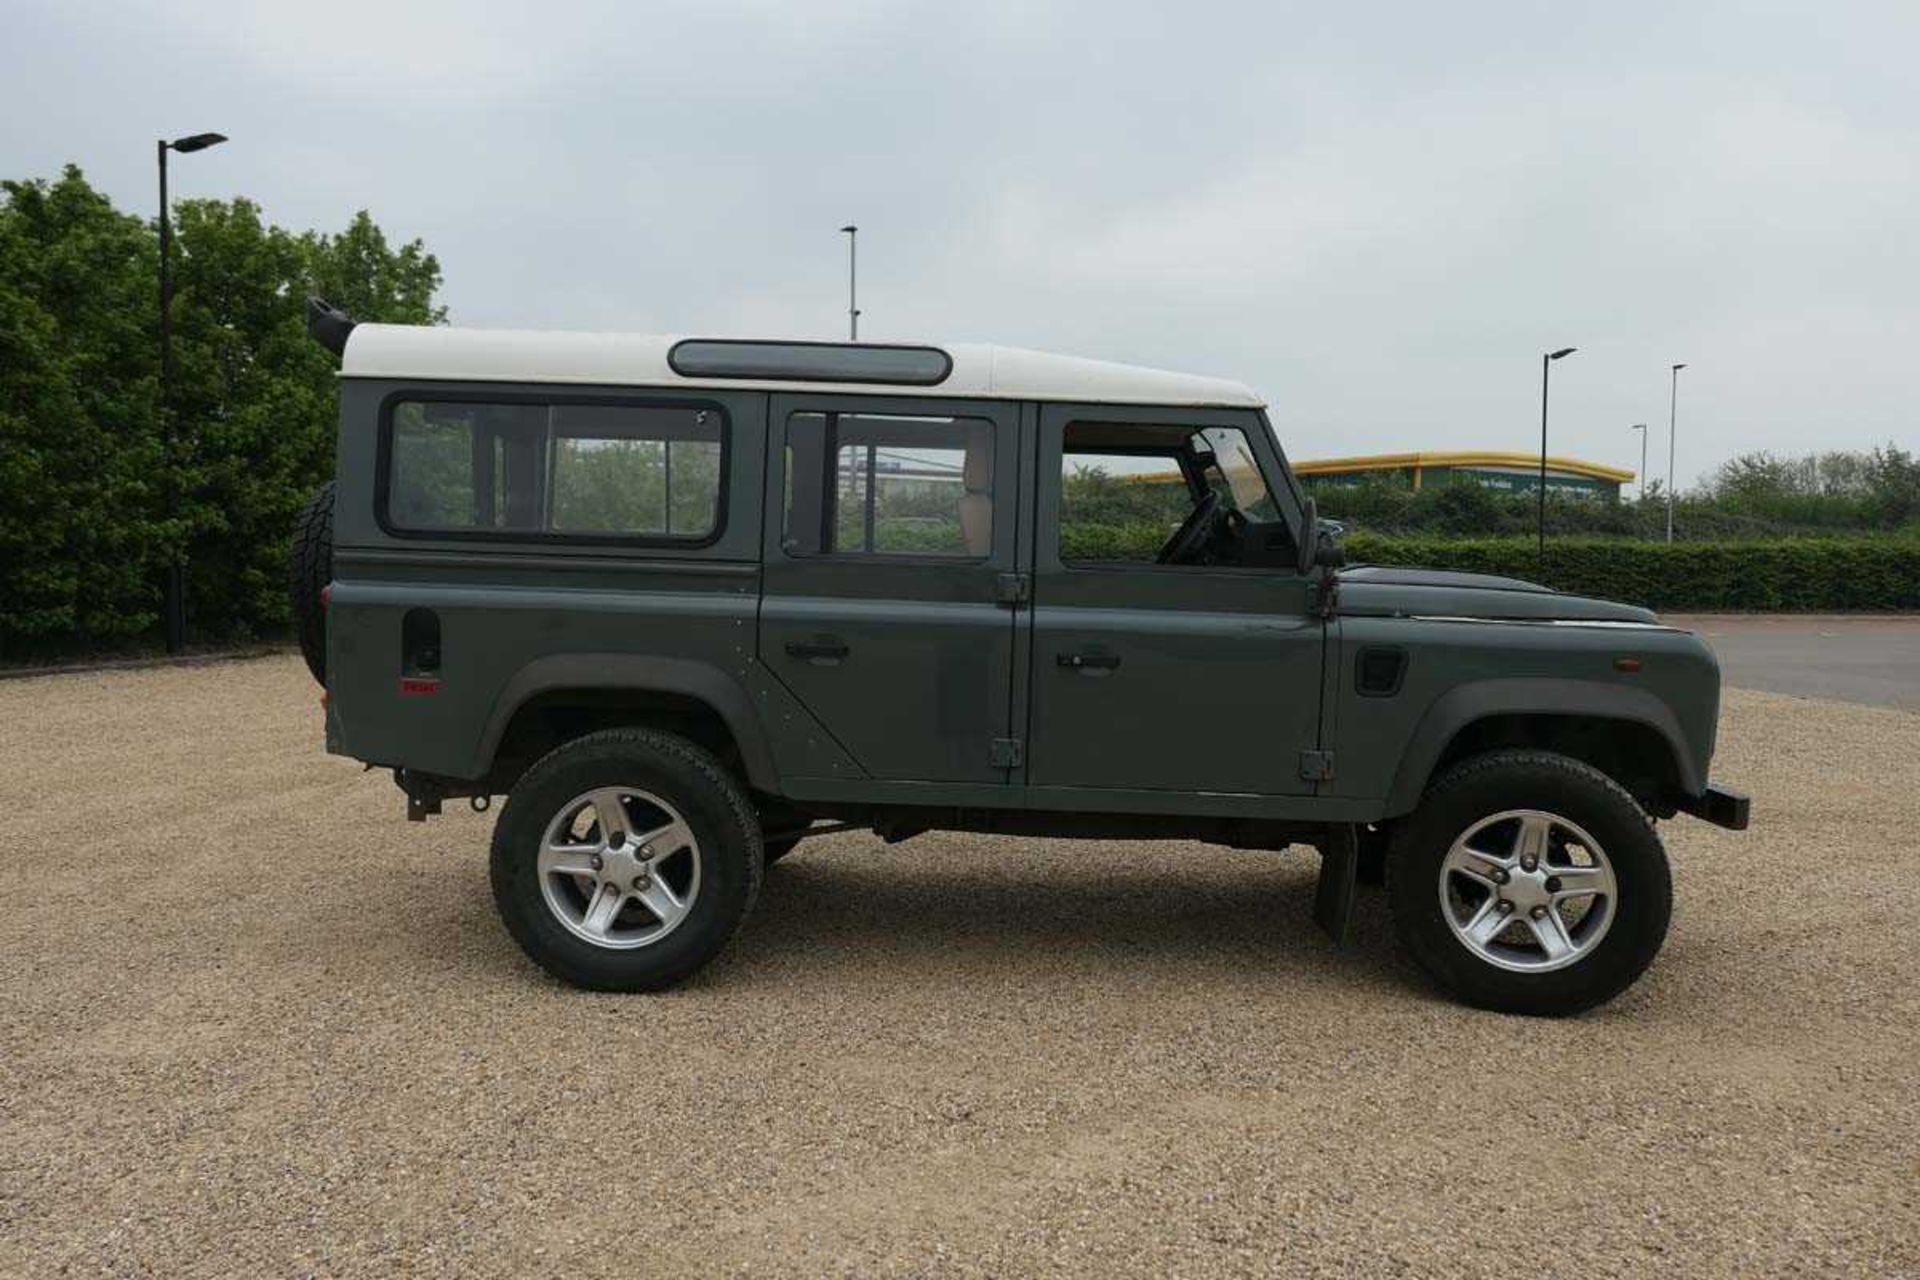 (LD58 NLV) 2008 Land Rover Defender 110 LWB station wagon estate in green, 2402cc diesel, 6-speed - Image 9 of 20